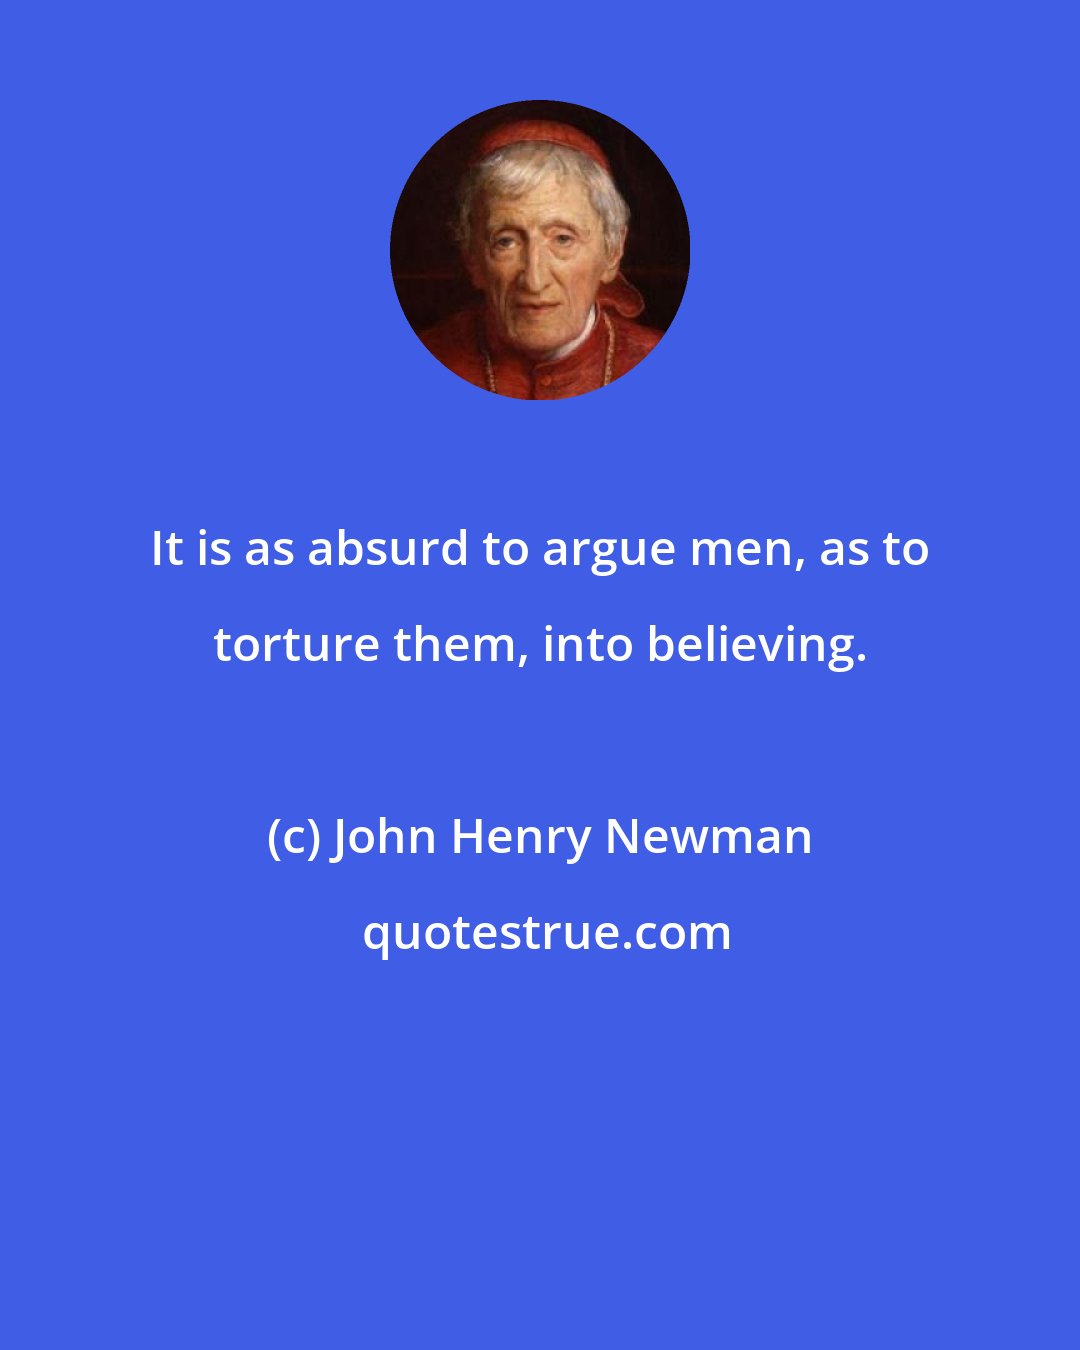 John Henry Newman: It is as absurd to argue men, as to torture them, into believing.